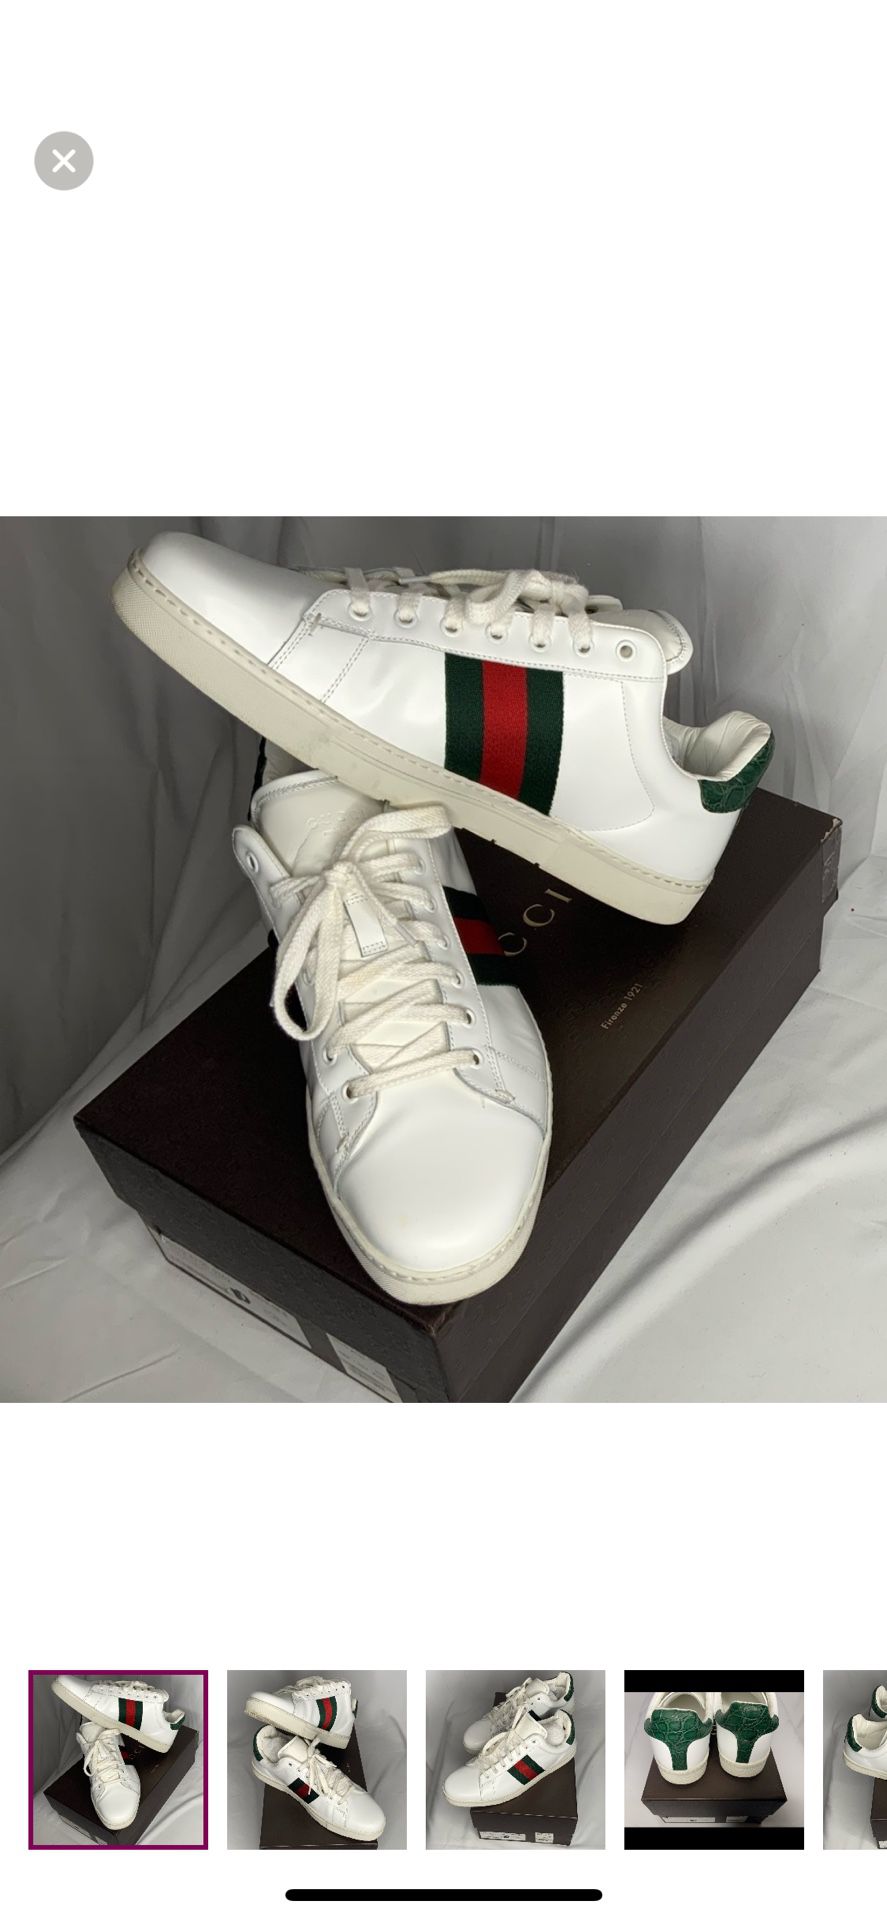 Pre-owned 100% Authentic Mens Gucci Ace Leather Low Top Sneakers US Shoe Size 10 - MADE IN ITALY